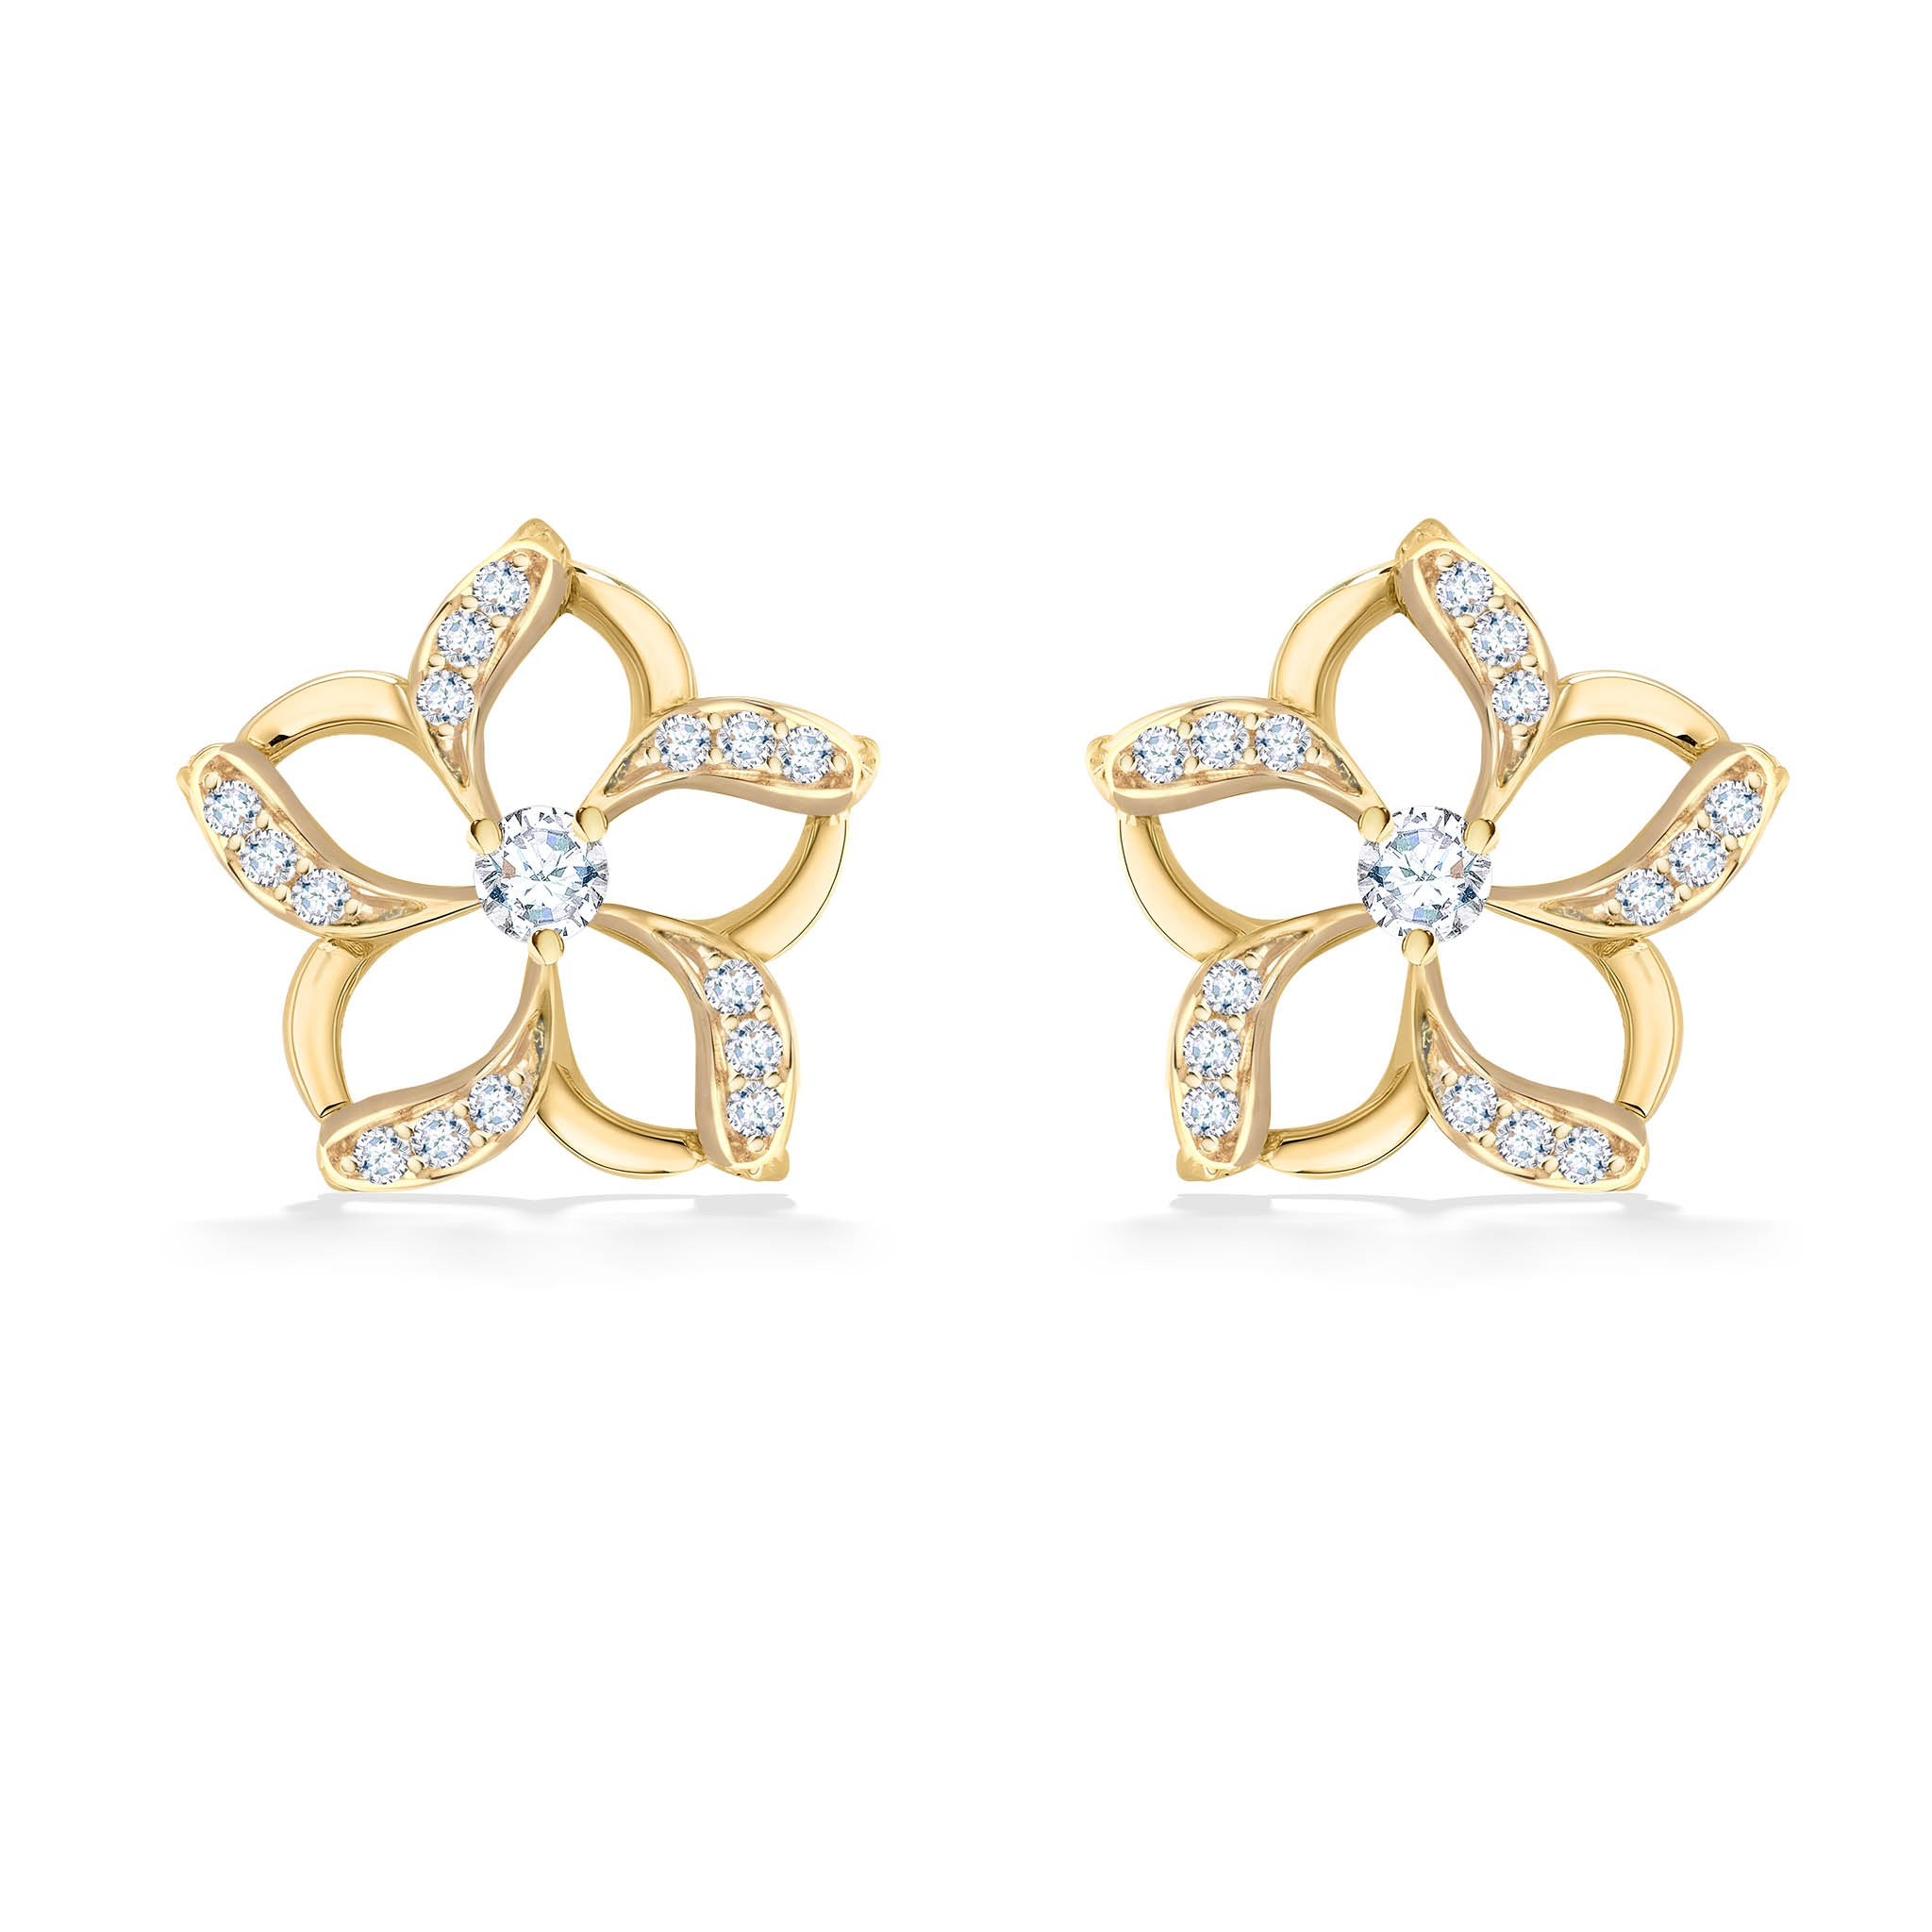 10K Yellow Gold Stud Earrings Fashion 6.5mm Moissanite Earrings for Women -  China Earrings and Stud Earrings price | Made-in-China.com